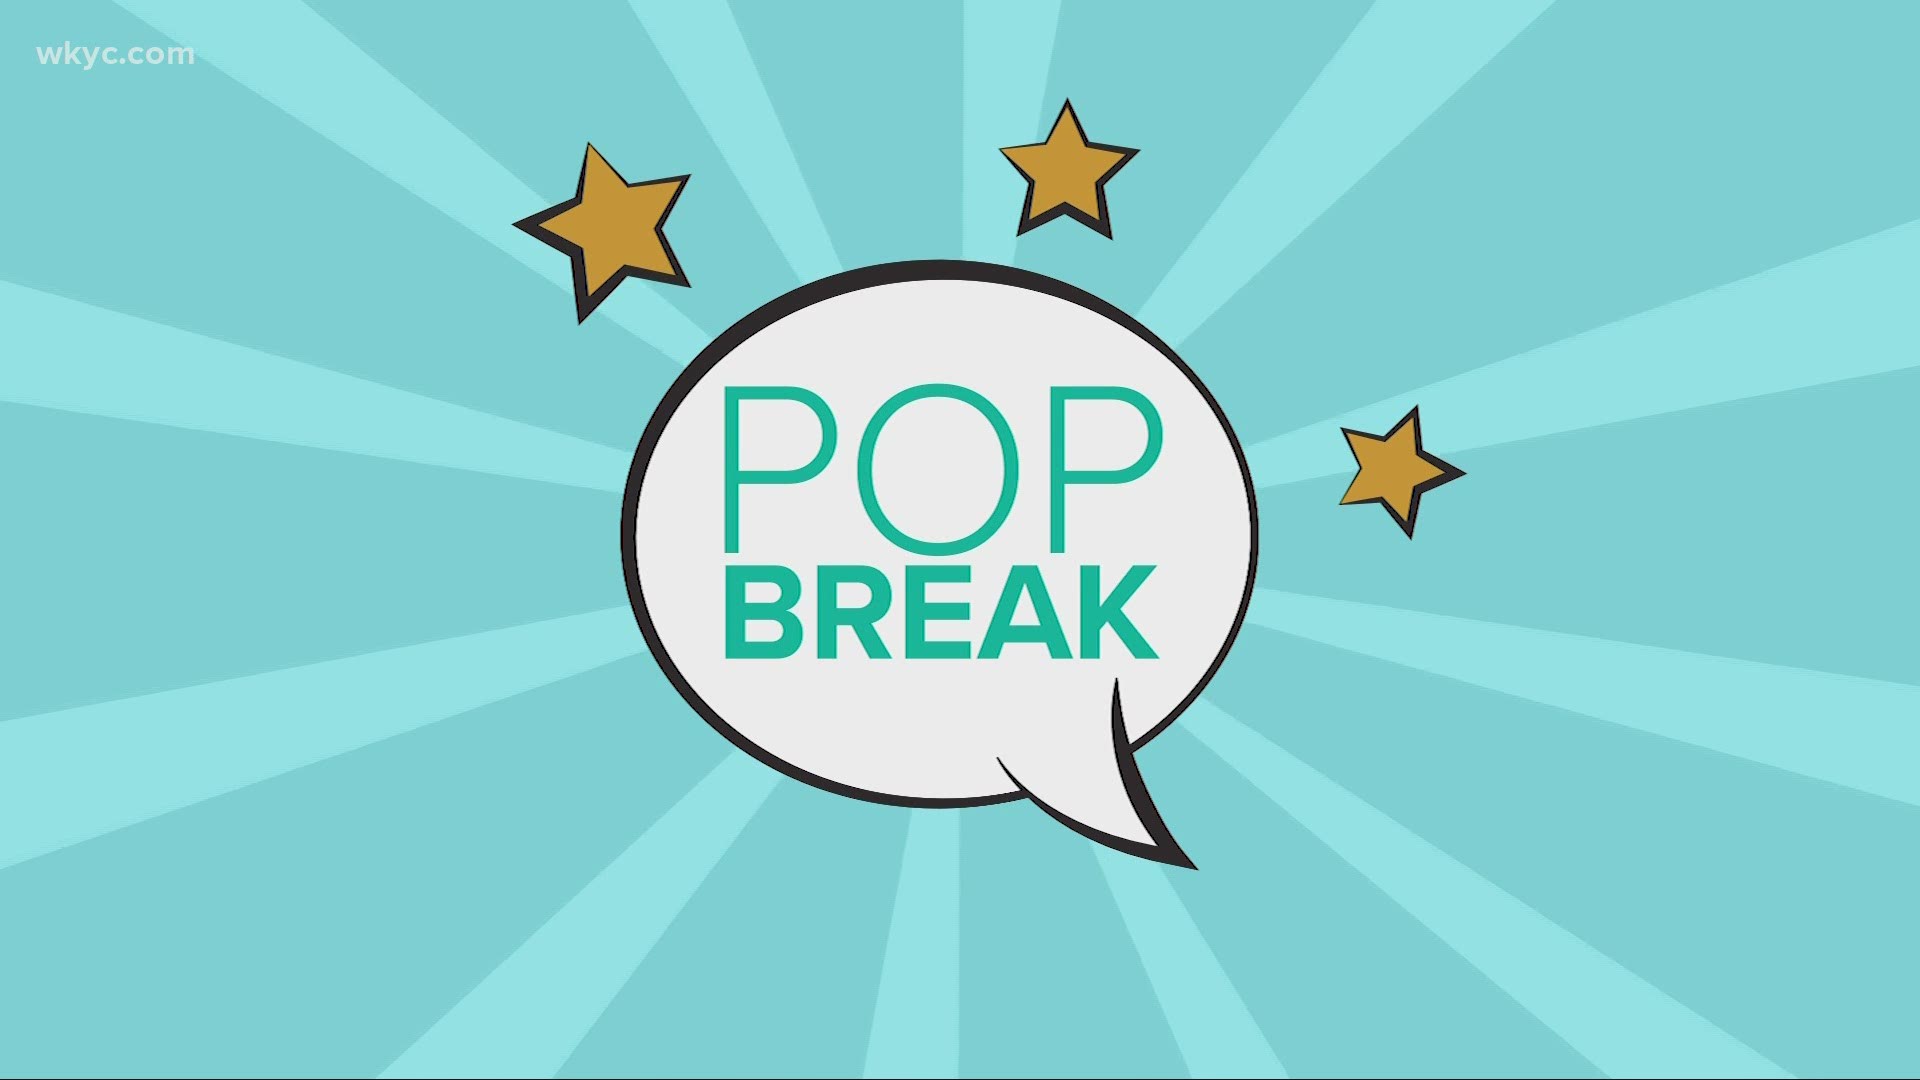 It's time for you daily dose of entertainment headlines. 3News' Stephanie Haney has the industries top stories in today's Pop Break.